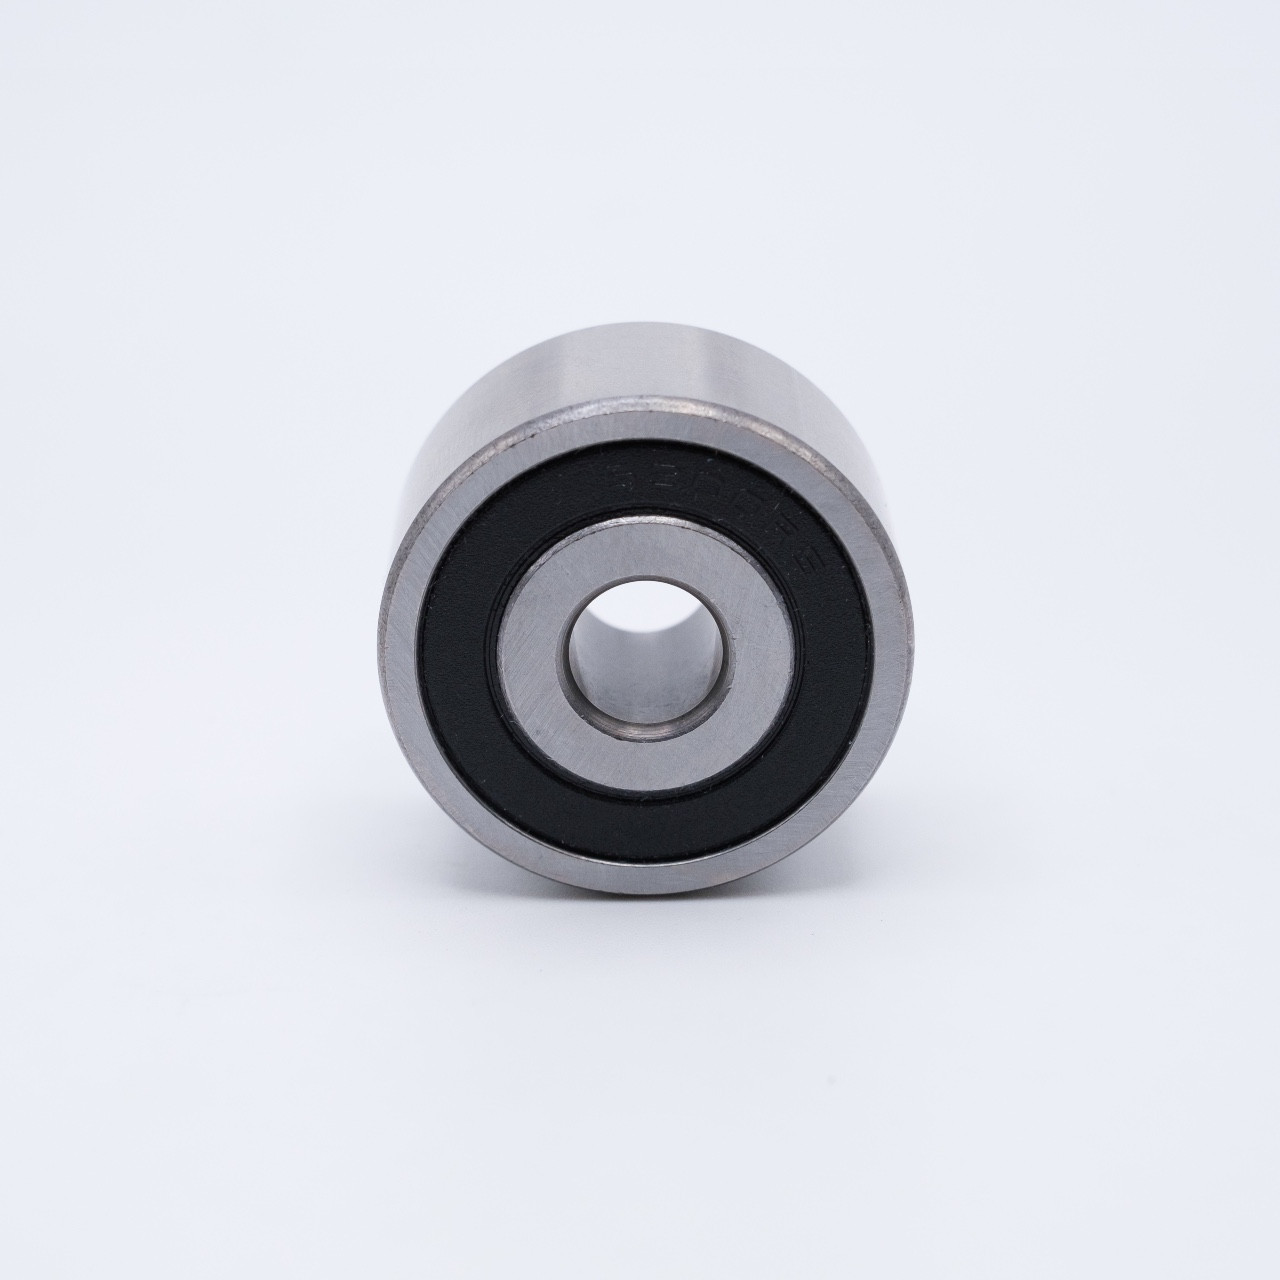 5202-2RS Double Row Ball Bearing 15x35x15.9mm Front View